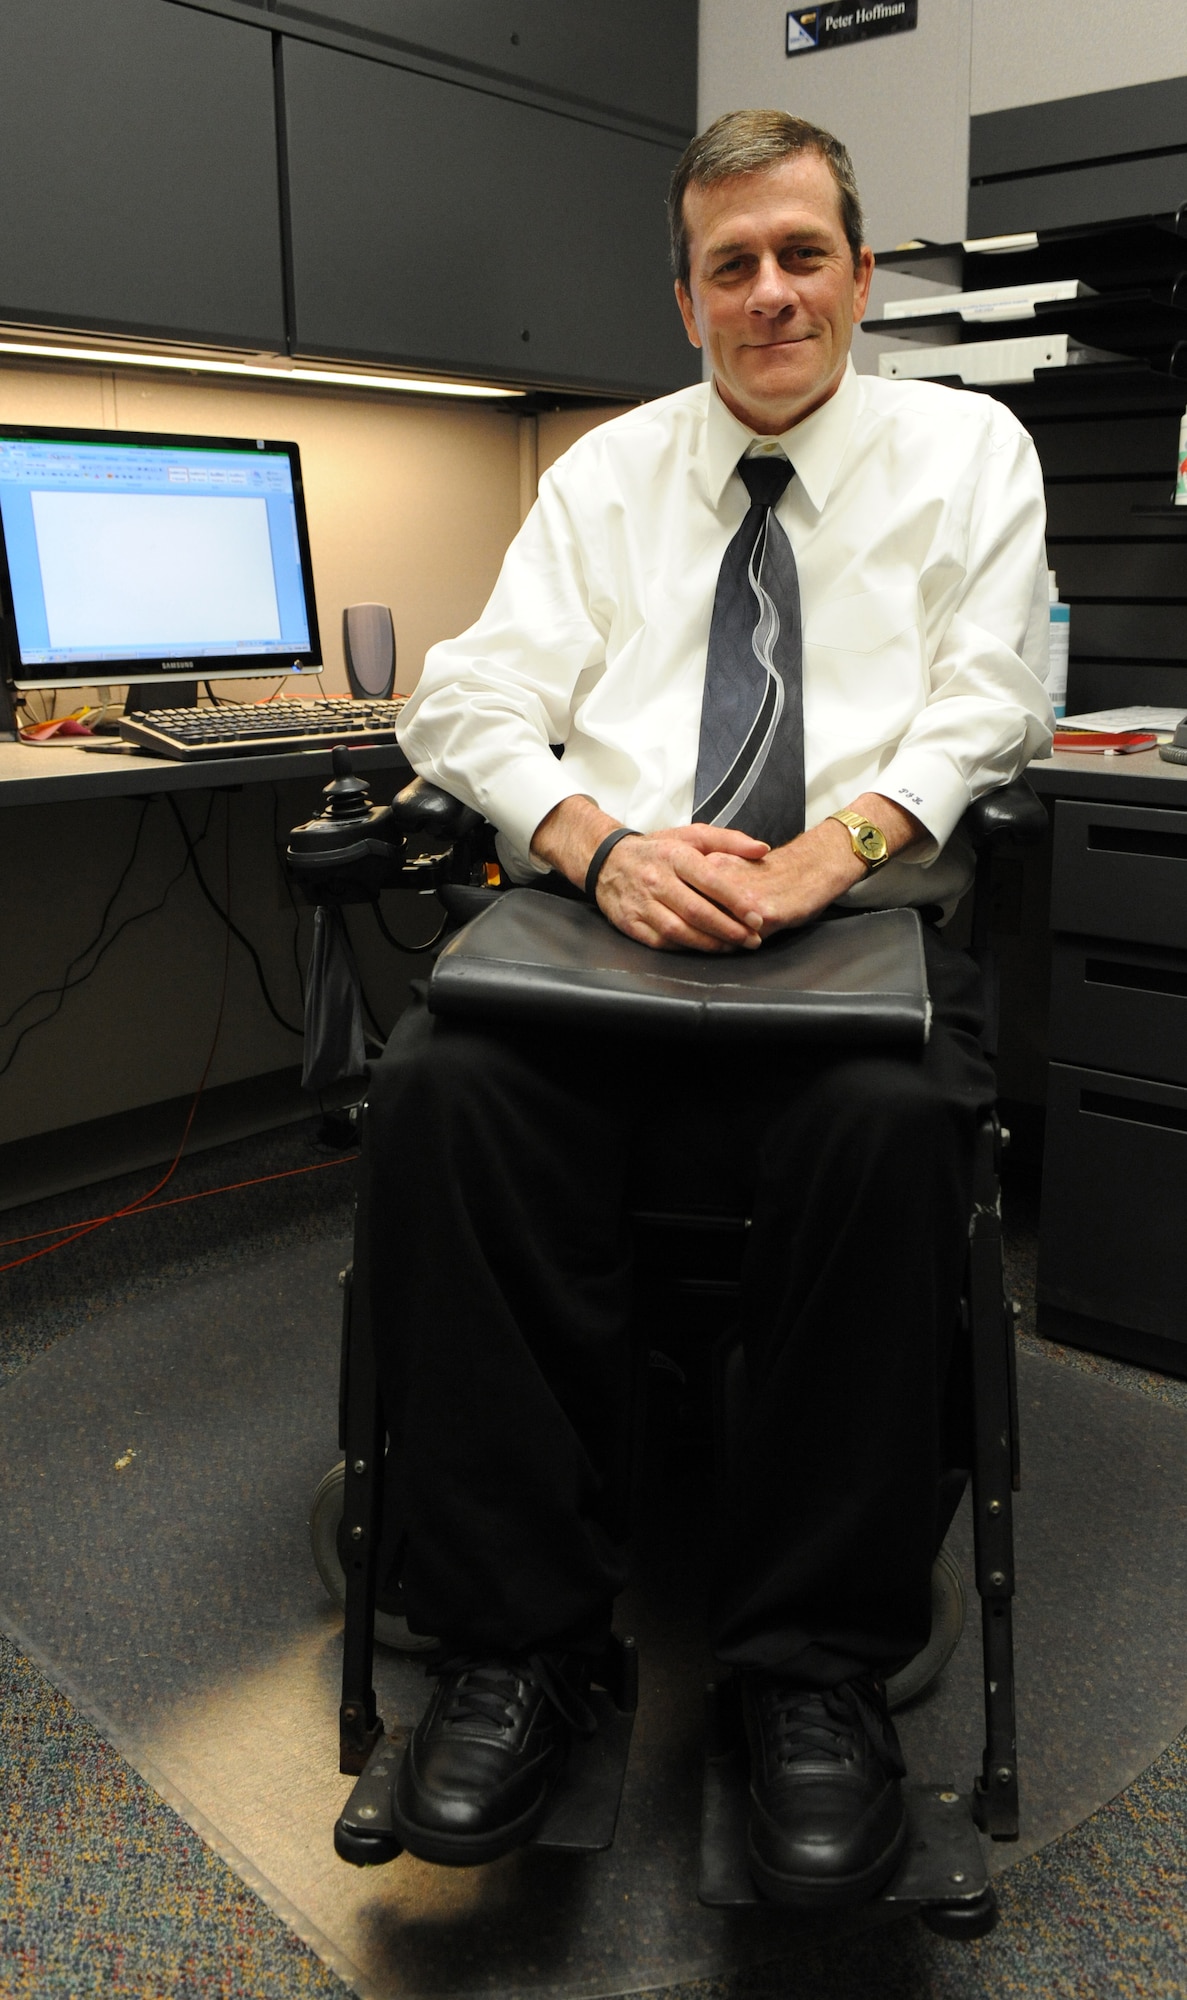 Peter Hoffman, 720th Special Tactics Group program analyst, poses by his work station at his group's headquarters building at Hurlburt Field, Fla., Oct. 15, 2010.  Mr. Hoffman, a quadriplegic, was hired by the 720th STG and became Hurlburt Field's first hire under a recent Presidential executive order directing an increase in hiring disabled people throughout the federal government. (DoD photo by U.S. Air Force Airman 1st Class Caitlin O'Neil-McKeown) (RELEASED)